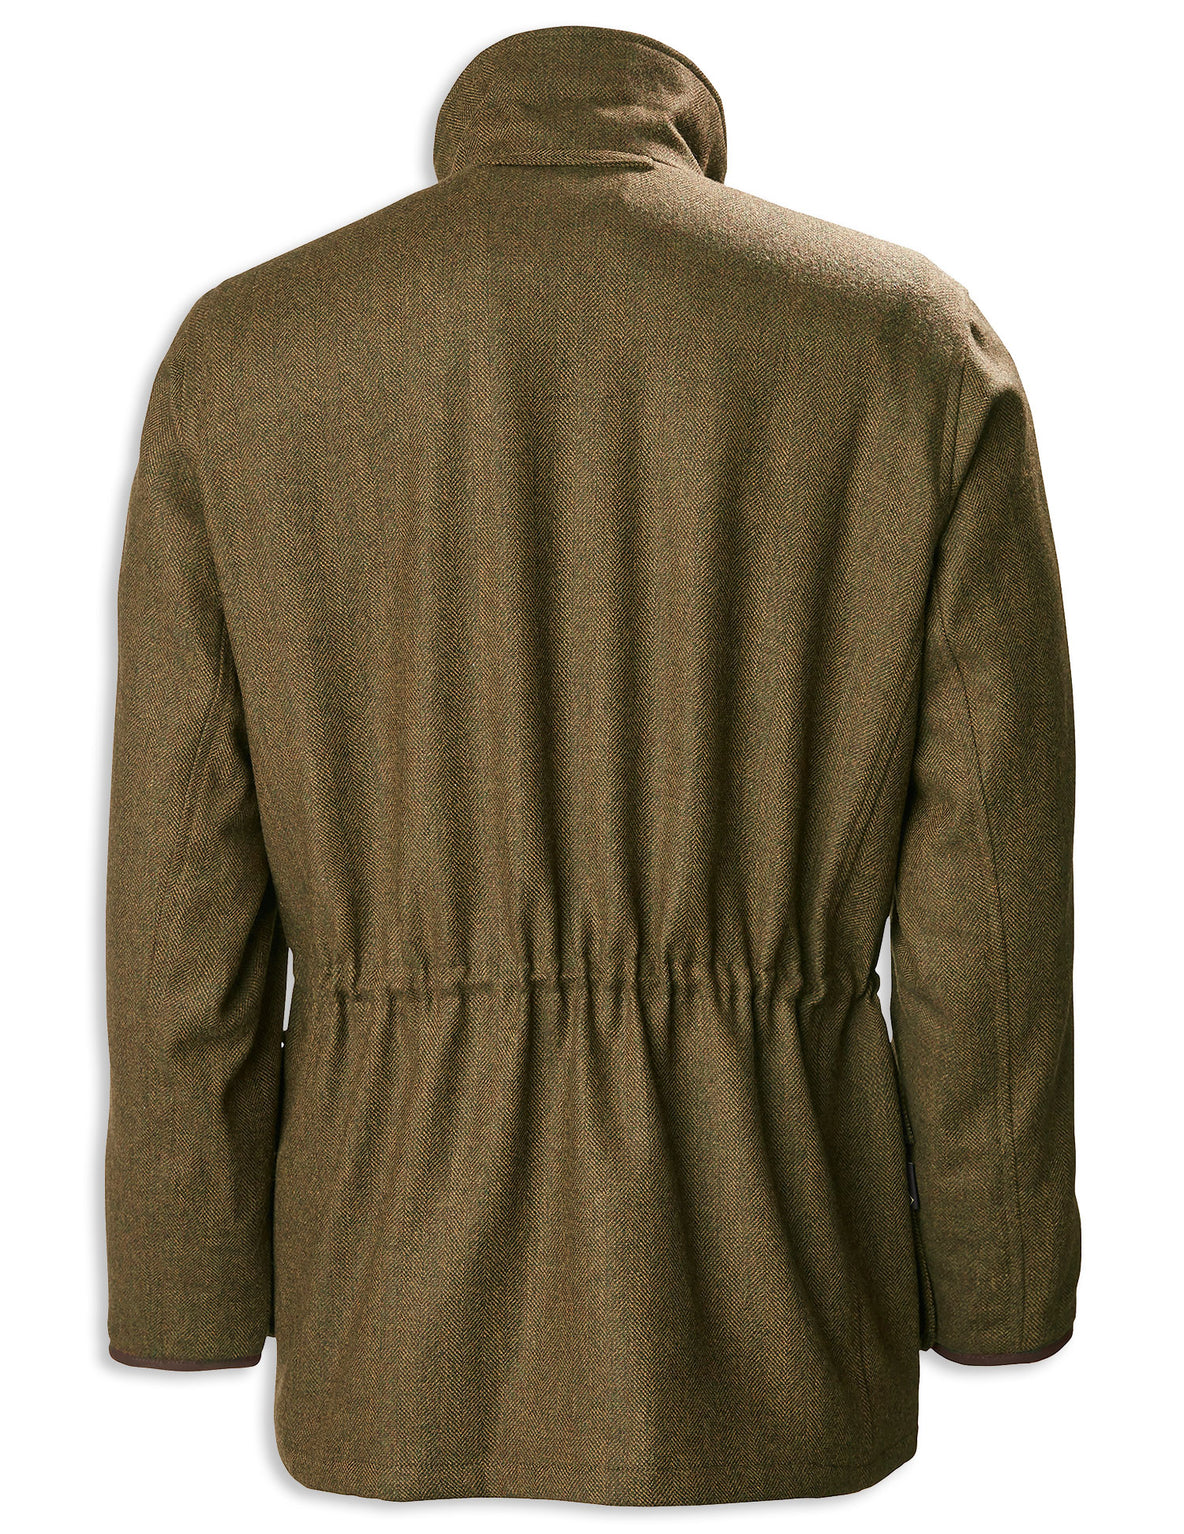 Stretch Gore-Tex Tweed Shooting Jacket by Musto